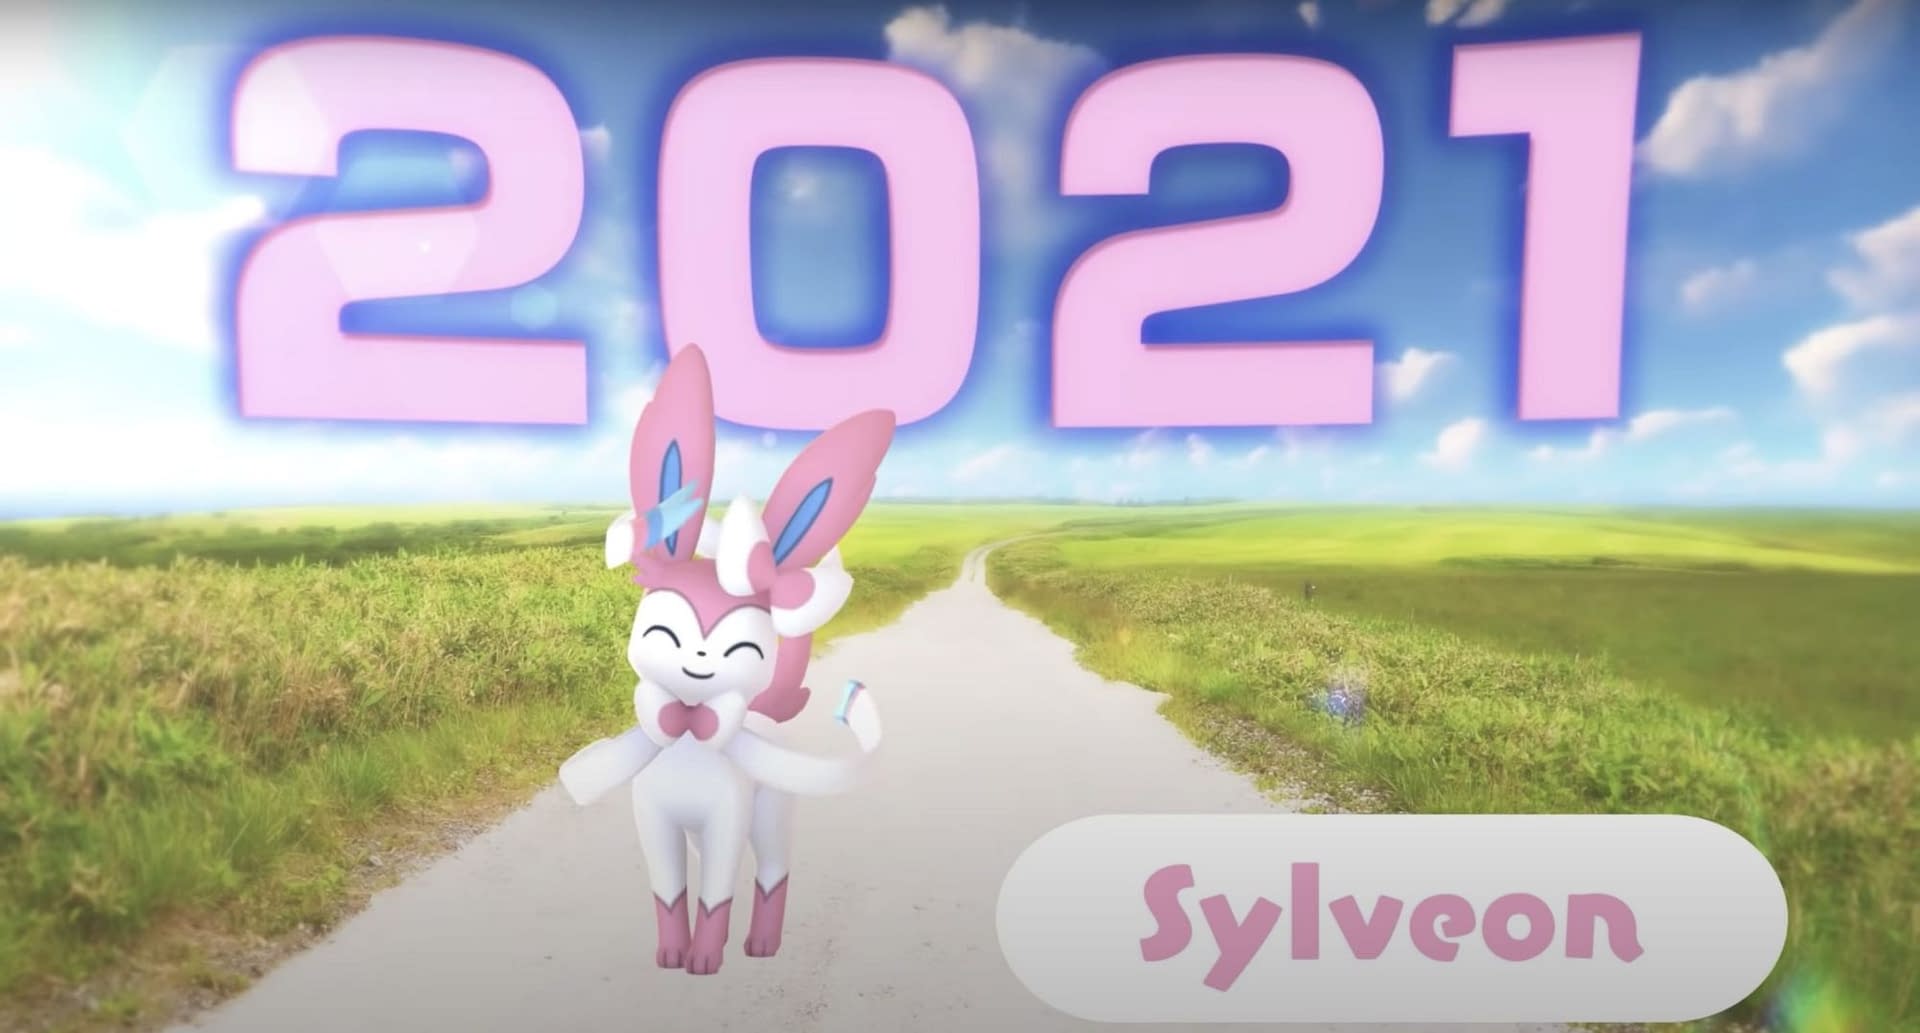 The Sylveon Name Trick In Pokemon Go Eeveelution Guide